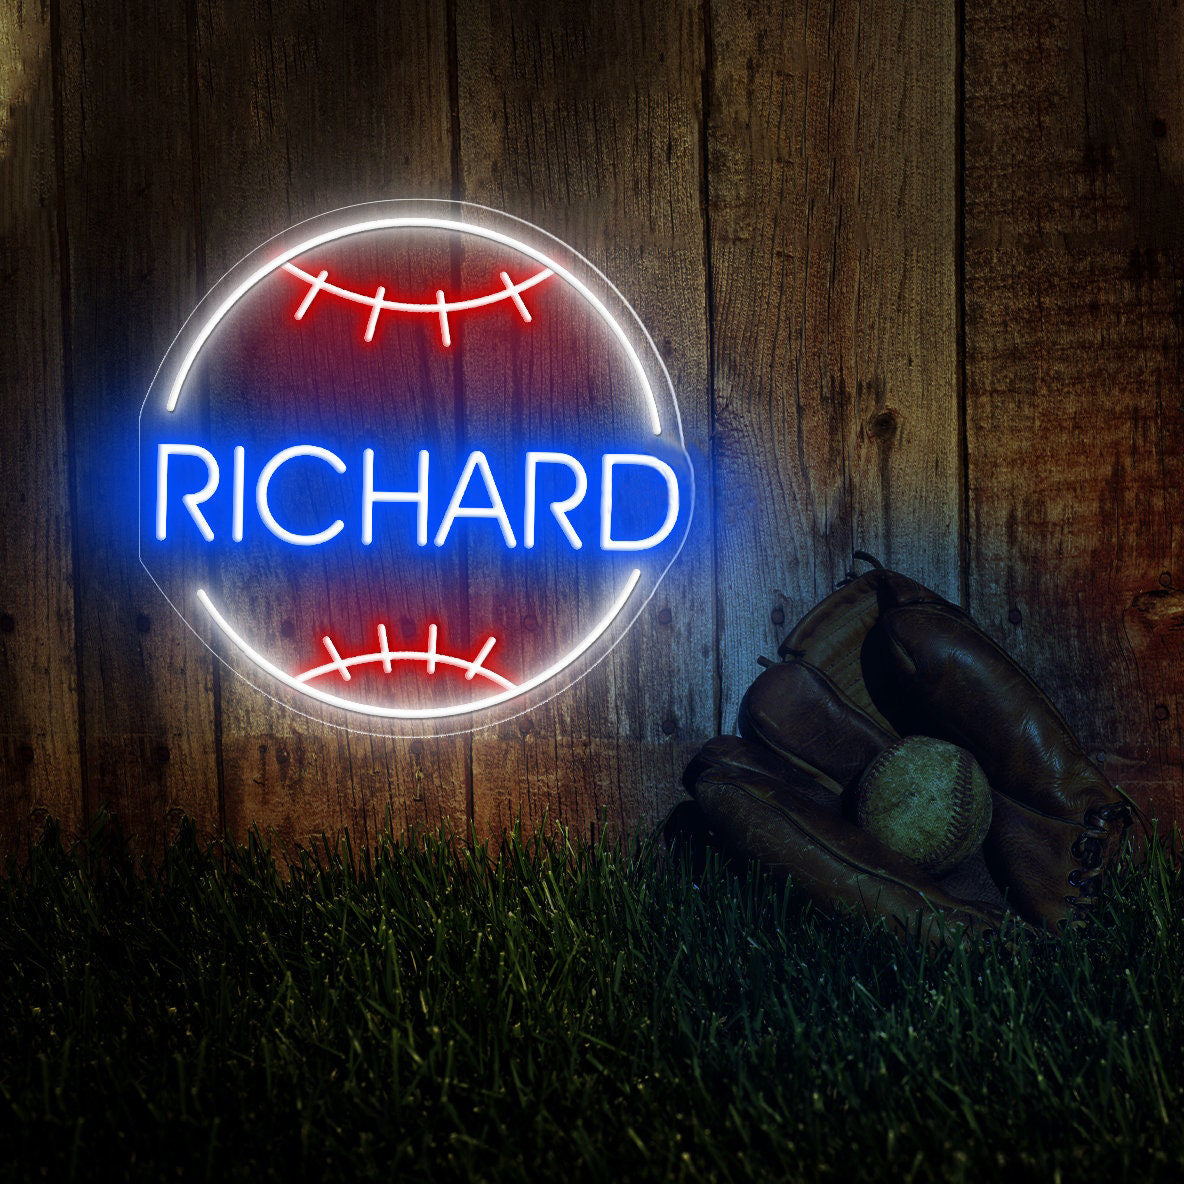 NEONIP-Personalized 100% Handmade Baseball LED Neon Sign with Your Adorable Kid's Name